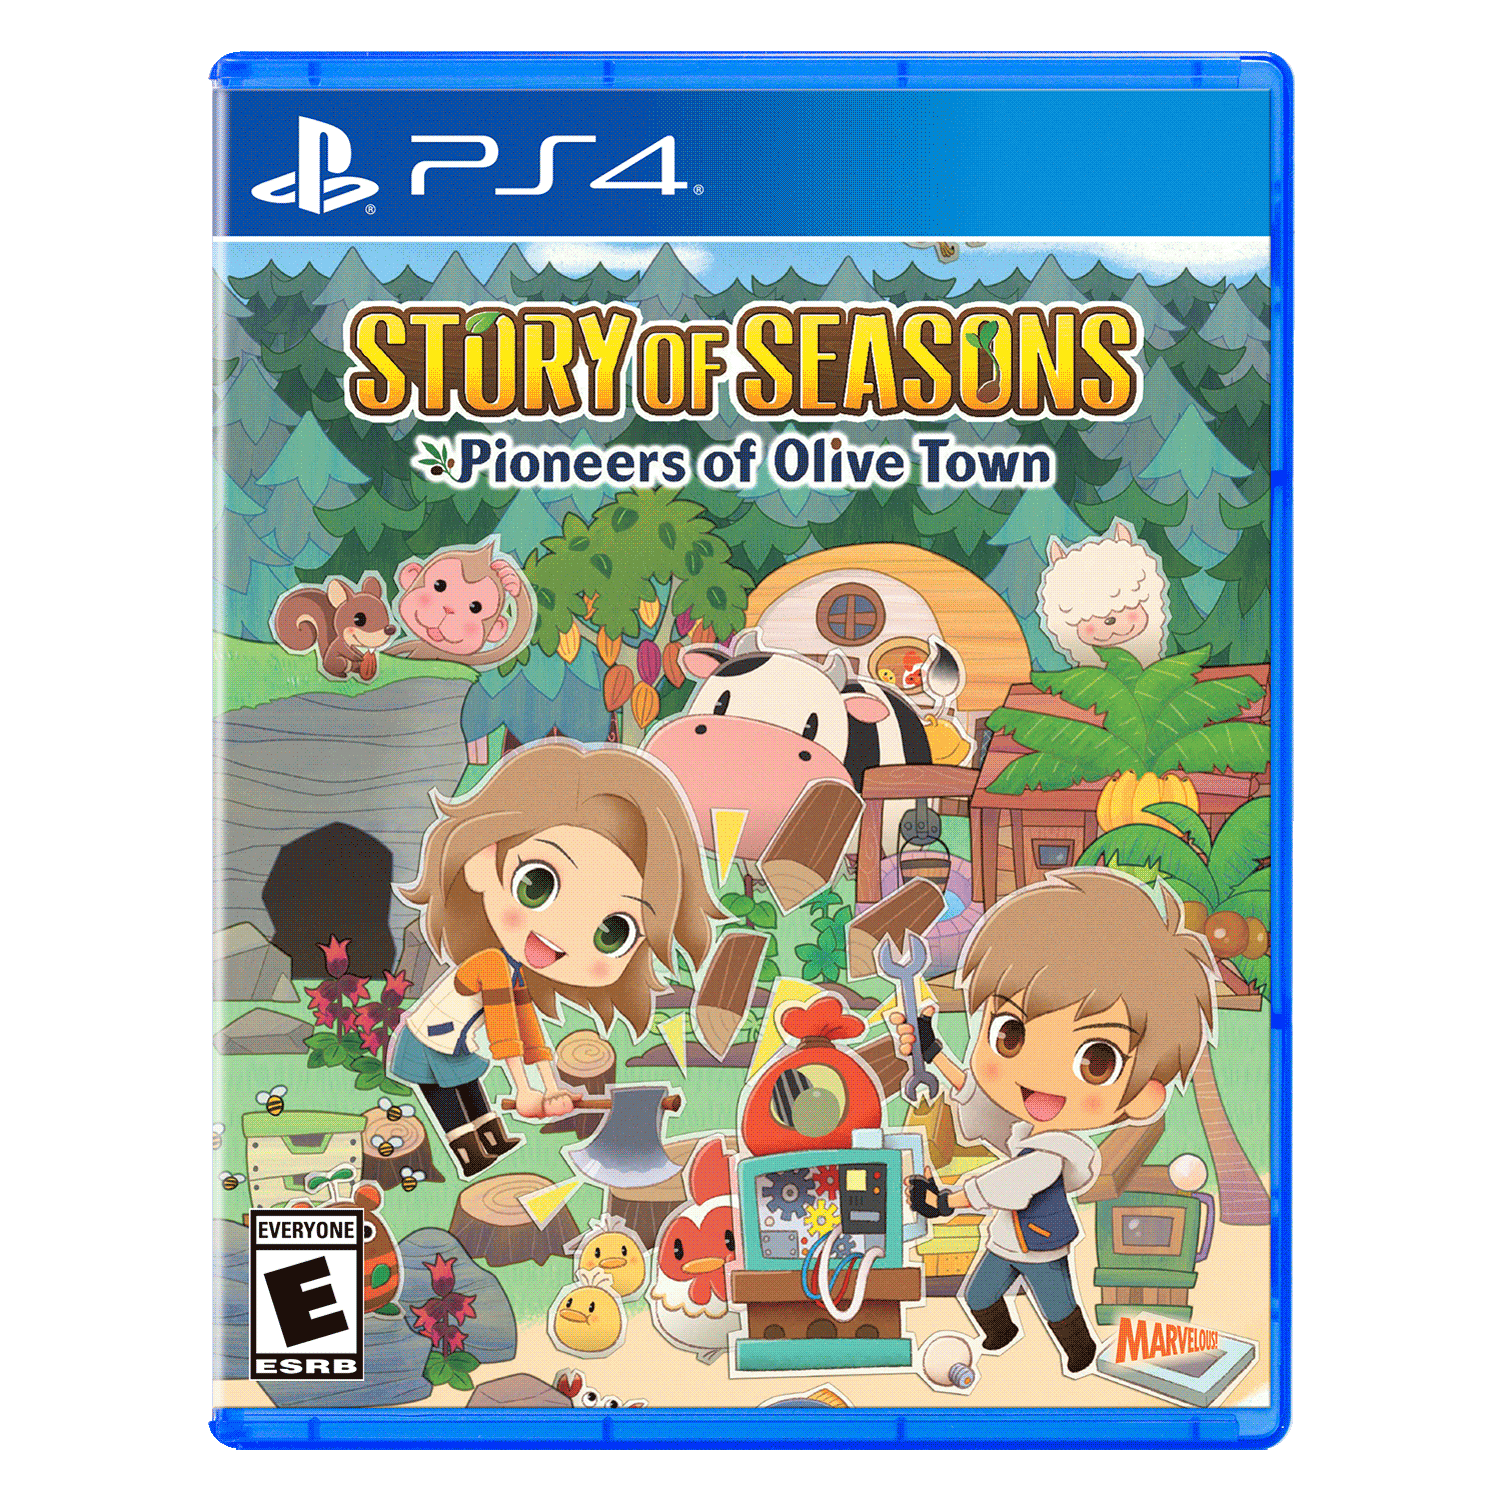 Jogo Story Of Seasons: Pioneers Of Olive Town para PS4